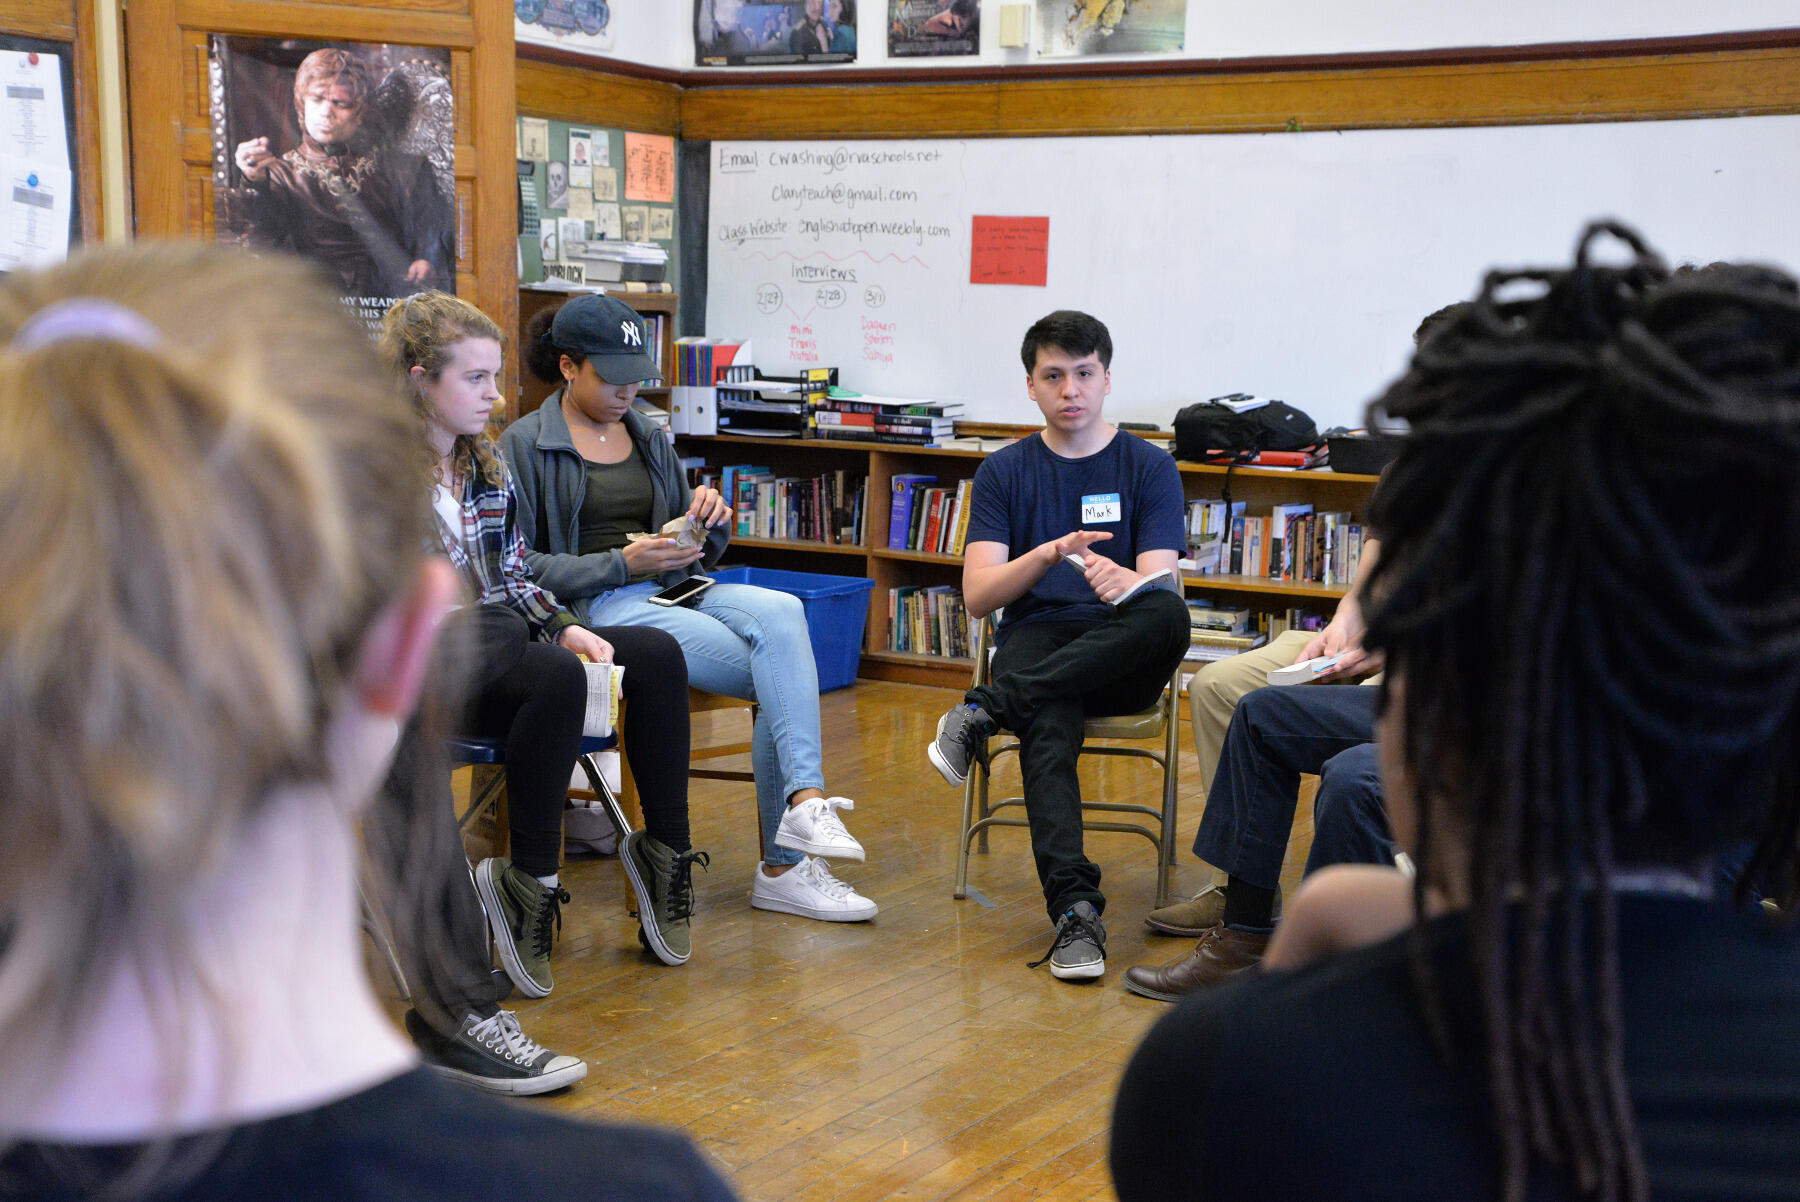 VCU student Mark Antezana asks an Open High School class questions about prison and juvenile justice as part of a discussion on "Just Mercy."